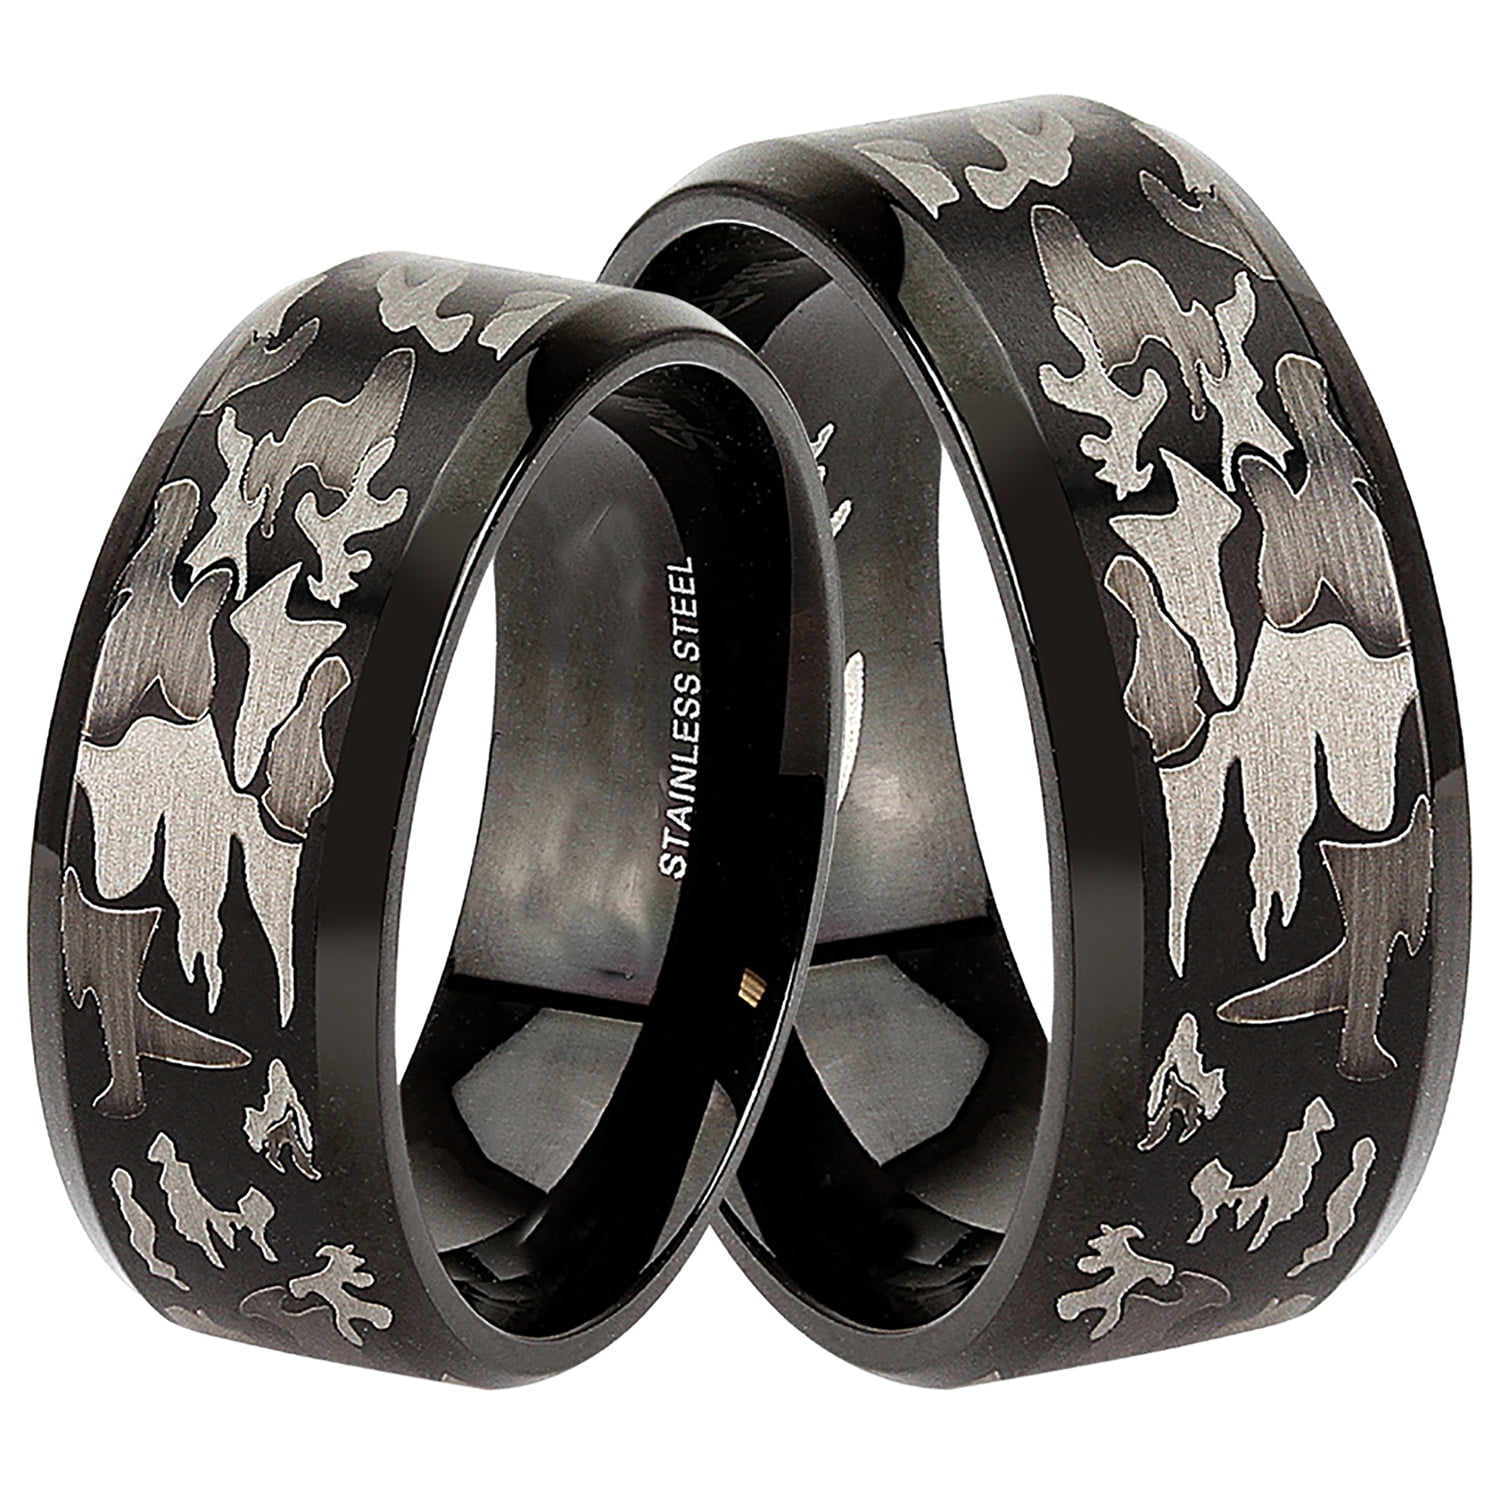 FB Jewels Tungsten Black Camouflage Military Beveled Edge Mens Comfort-fit 8mm Wedding Anniversary Band Ring